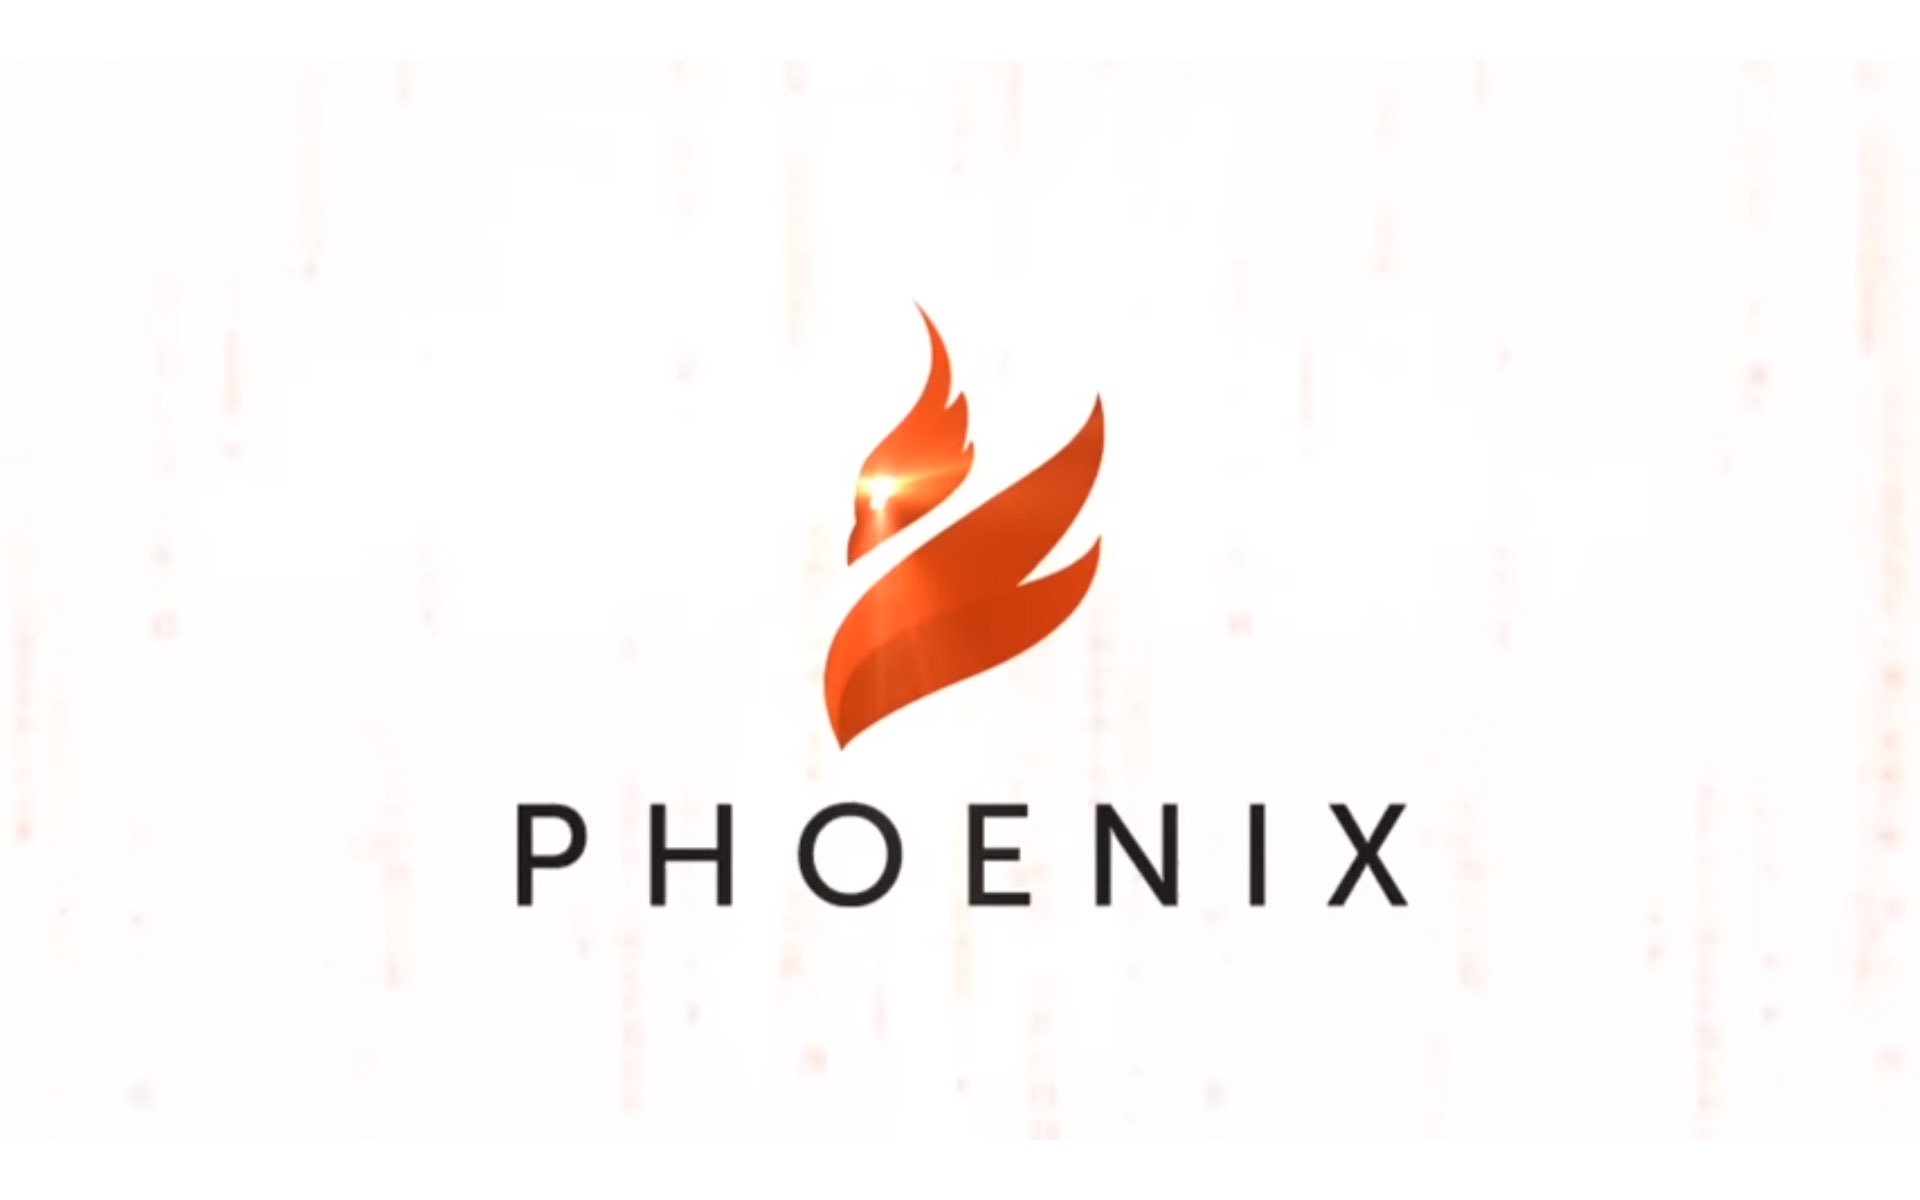 An Exclusive Interview with the Team Behind the Innovative and Profitable Phoenix Investment Platform